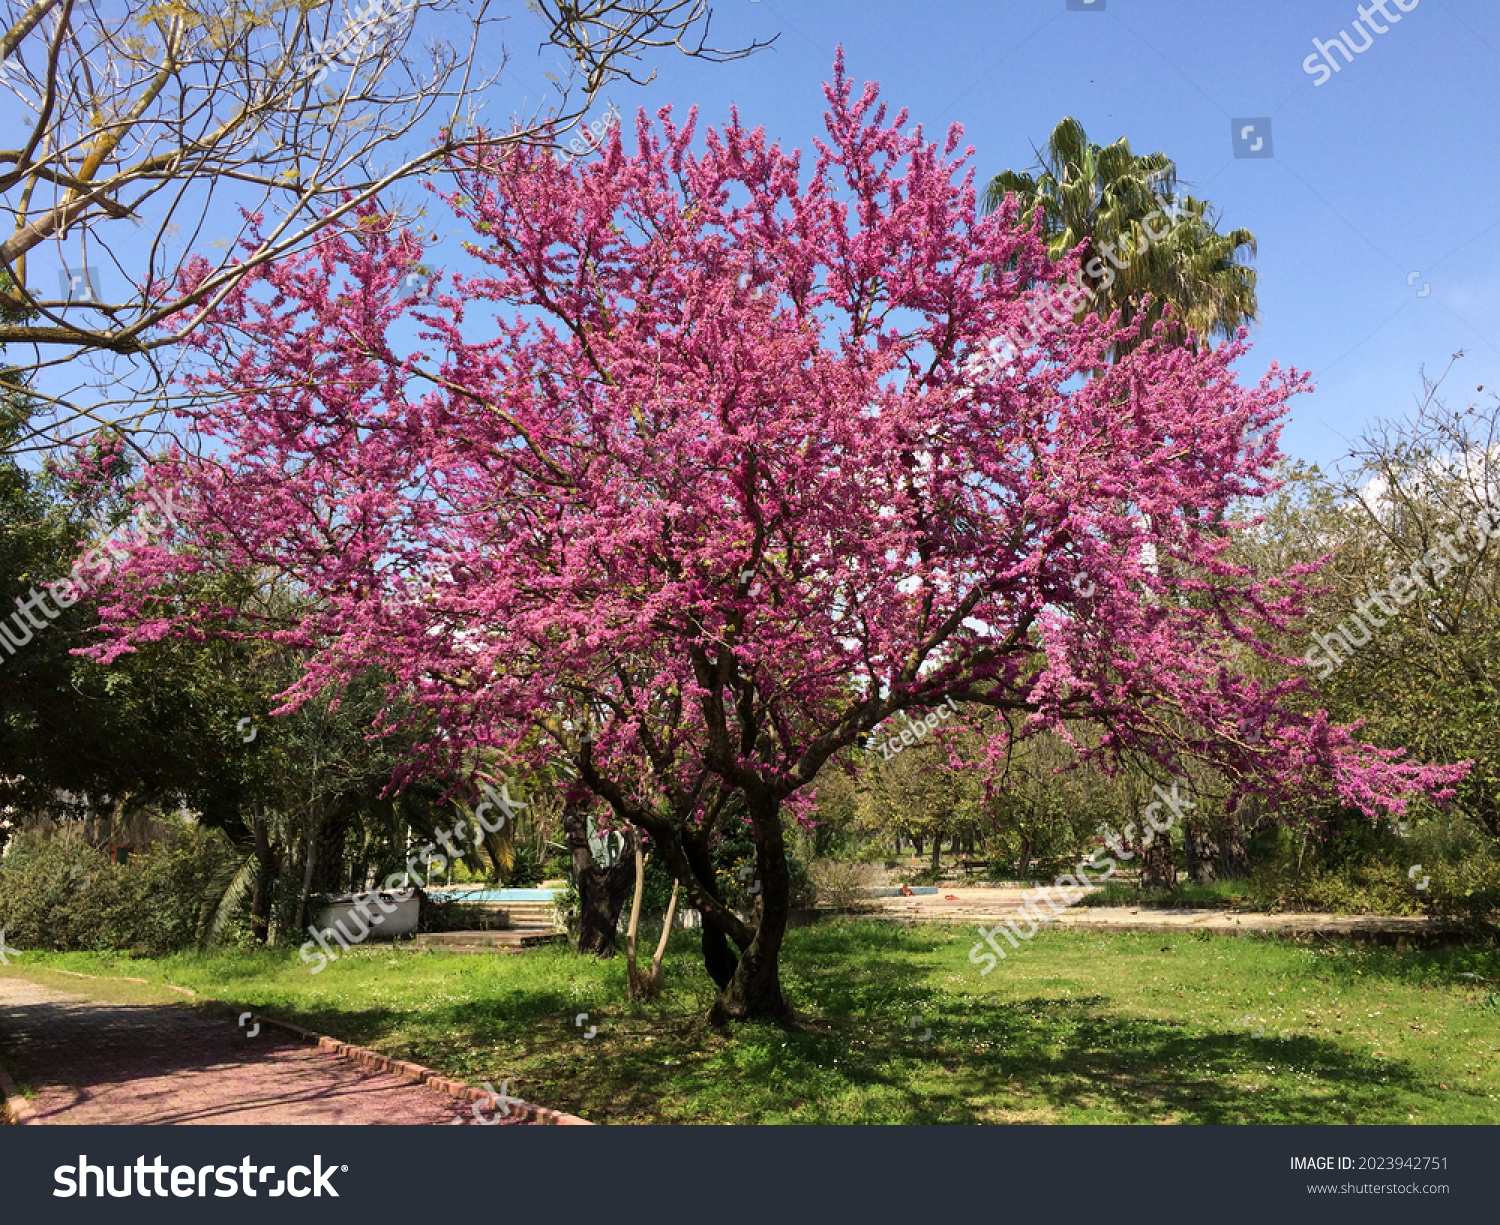 Cercis siliquastrum, commonly known as the Judas tree or Judas-tree, is a small deciduous tree native to Southern Europe and Western Asia, especially to Eastern Mediterrenean region. #2023942751